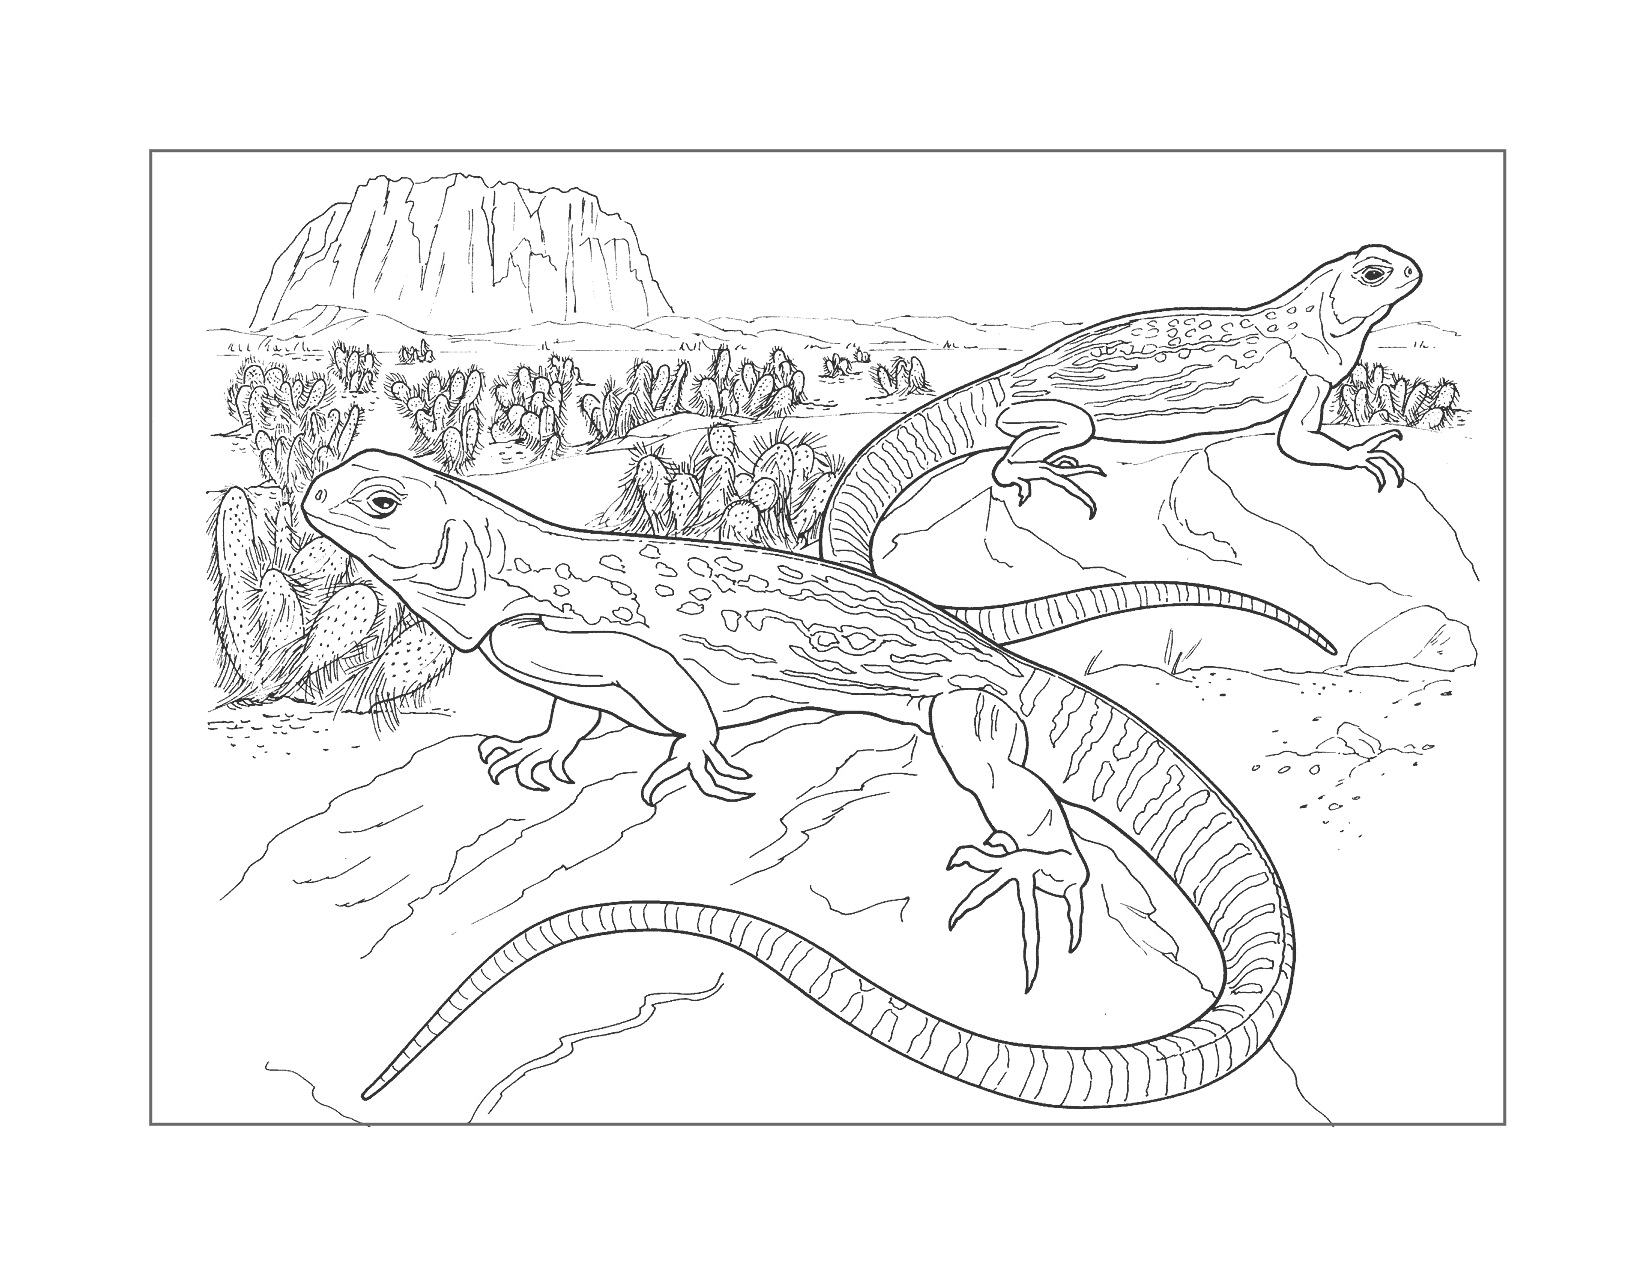 Lizards In The Desert Coloring Page